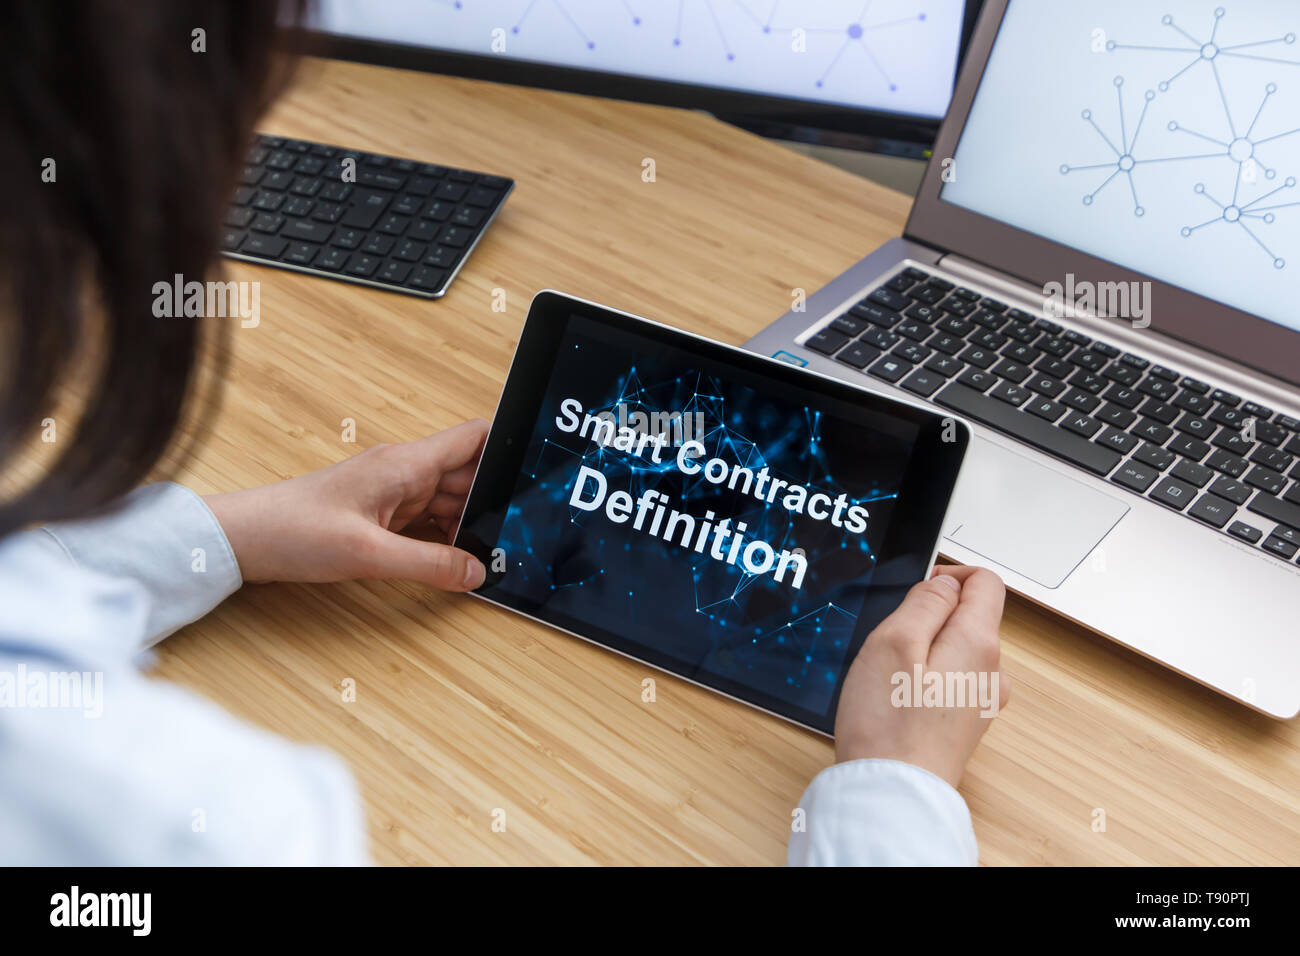 Business Female Using Smart Contracts For Definition. Illustration of Ethereum Blockchain on the Screen of Tablet, PC and Laptop. Stock Photo